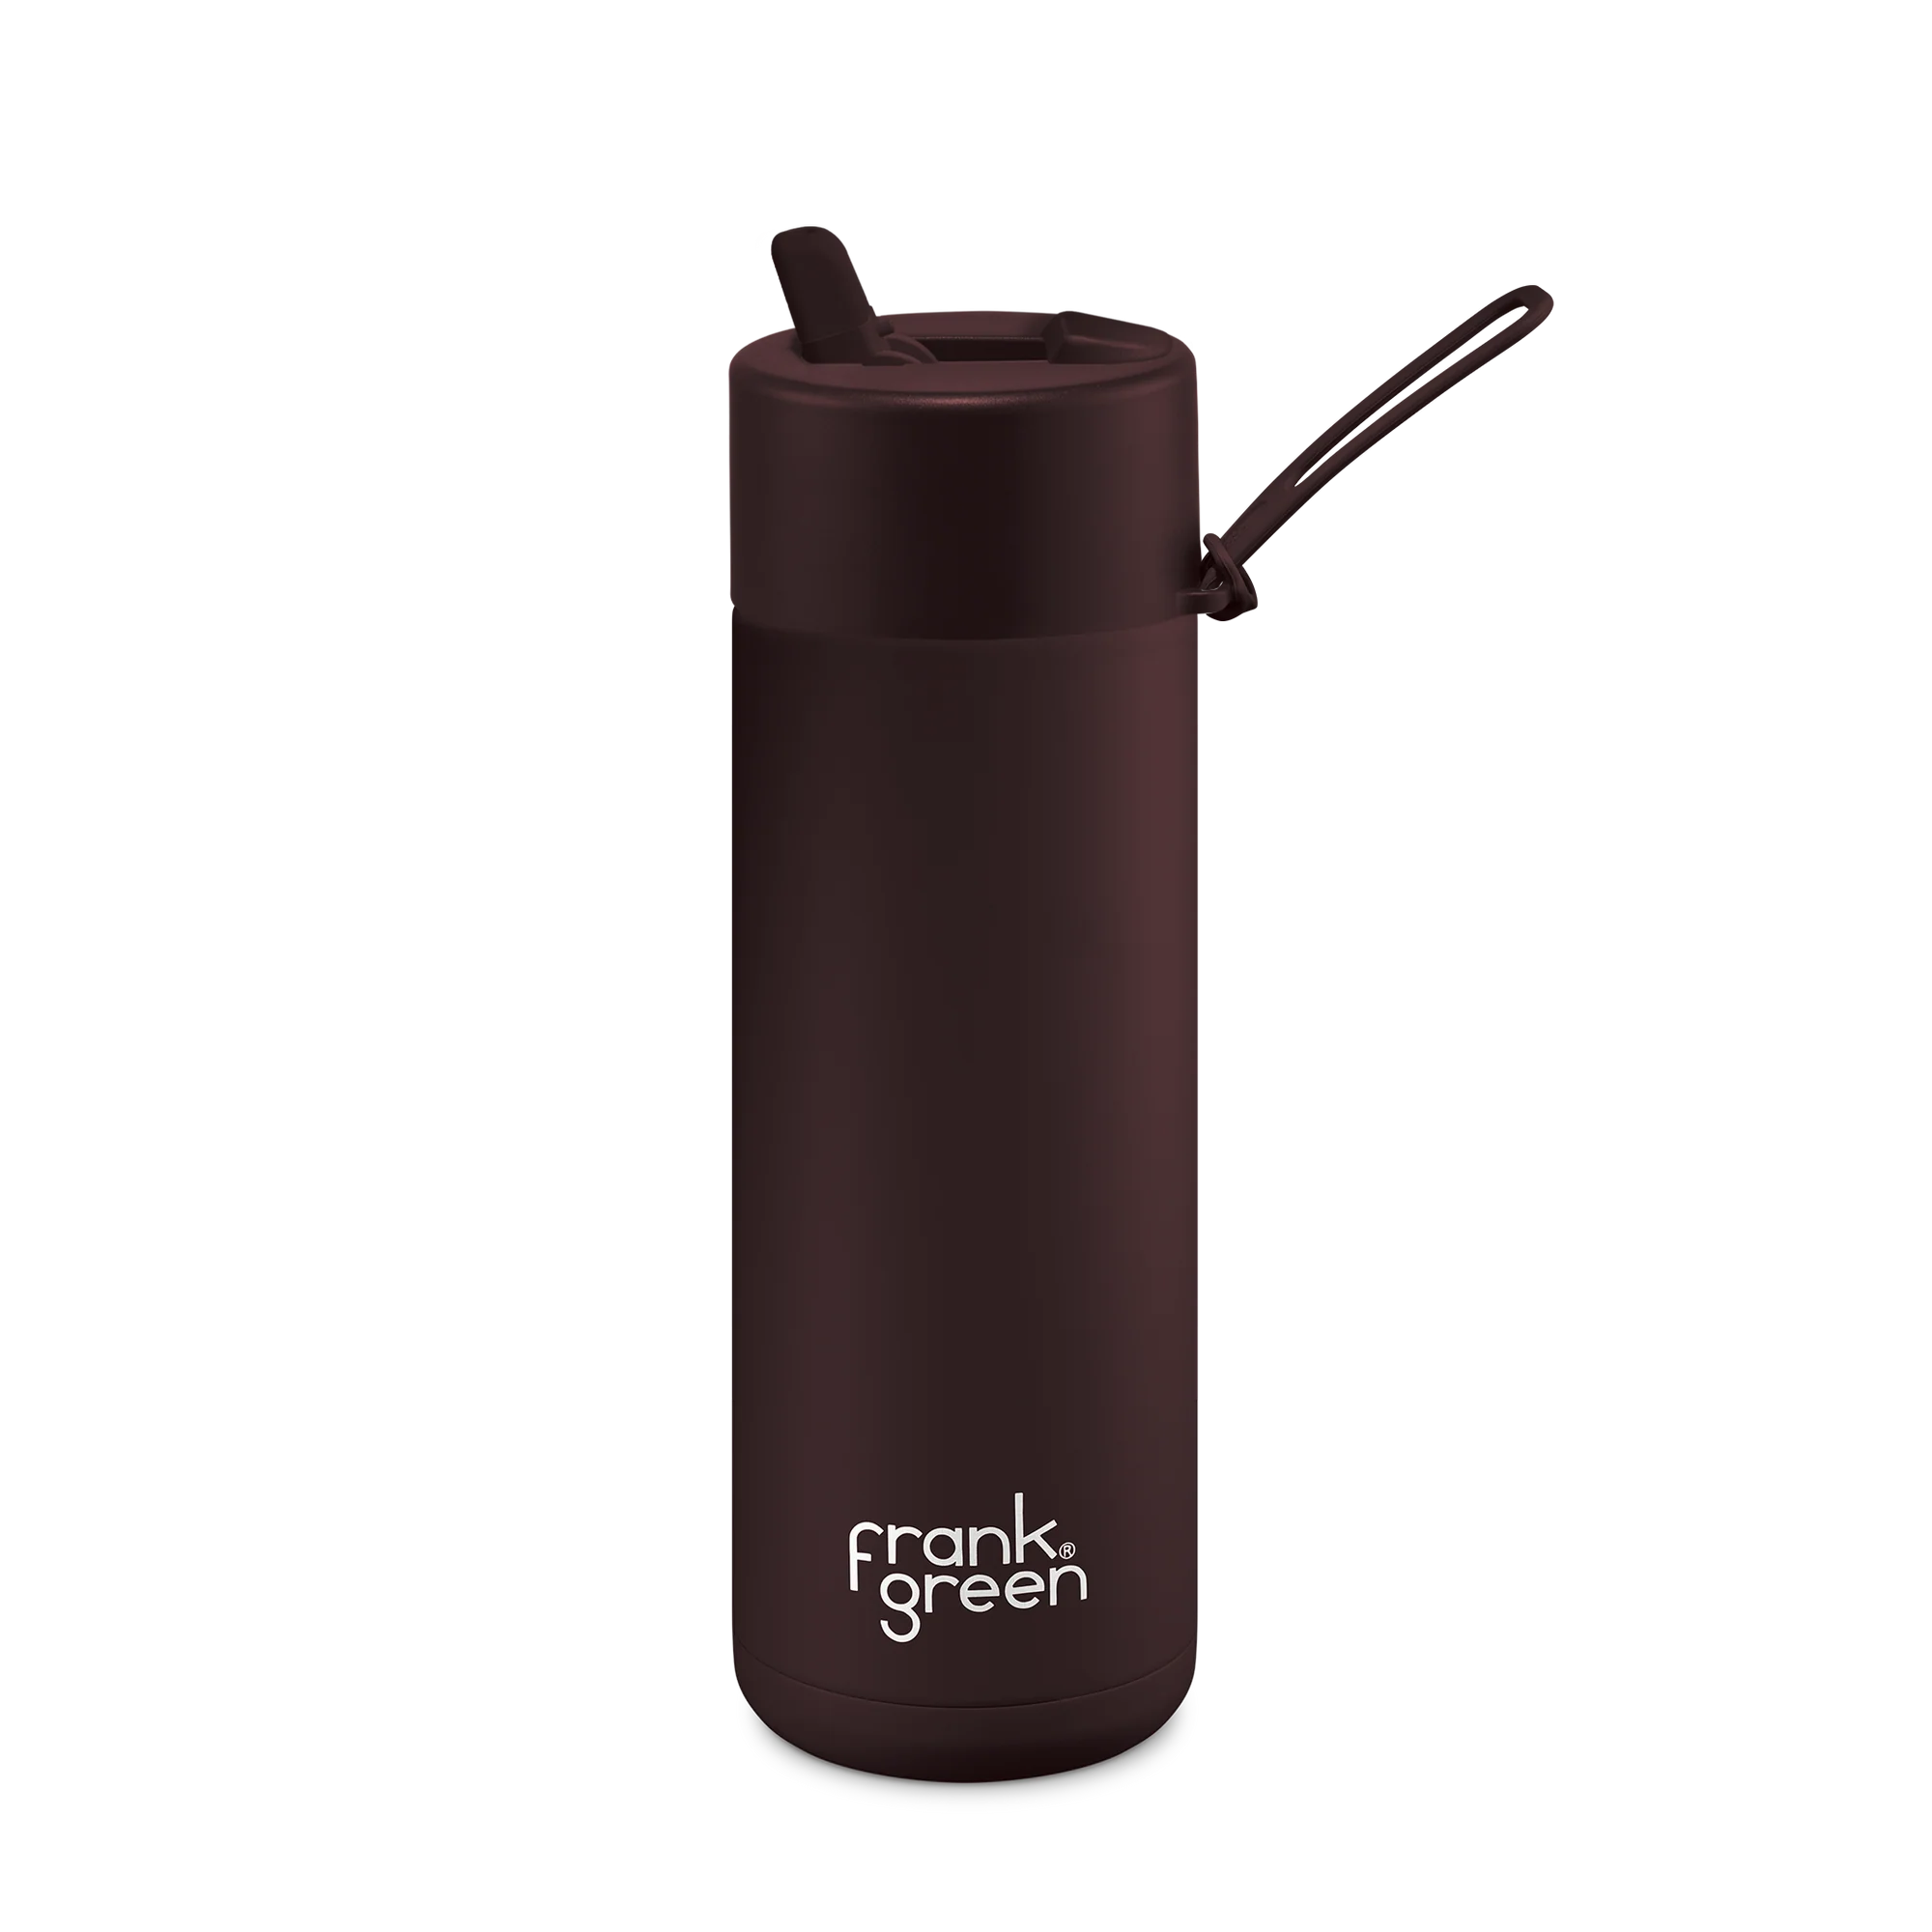 Frank Green Stainless Steel Ceramic Reusable Bottle Chocolate With Straw 20oz/595ml